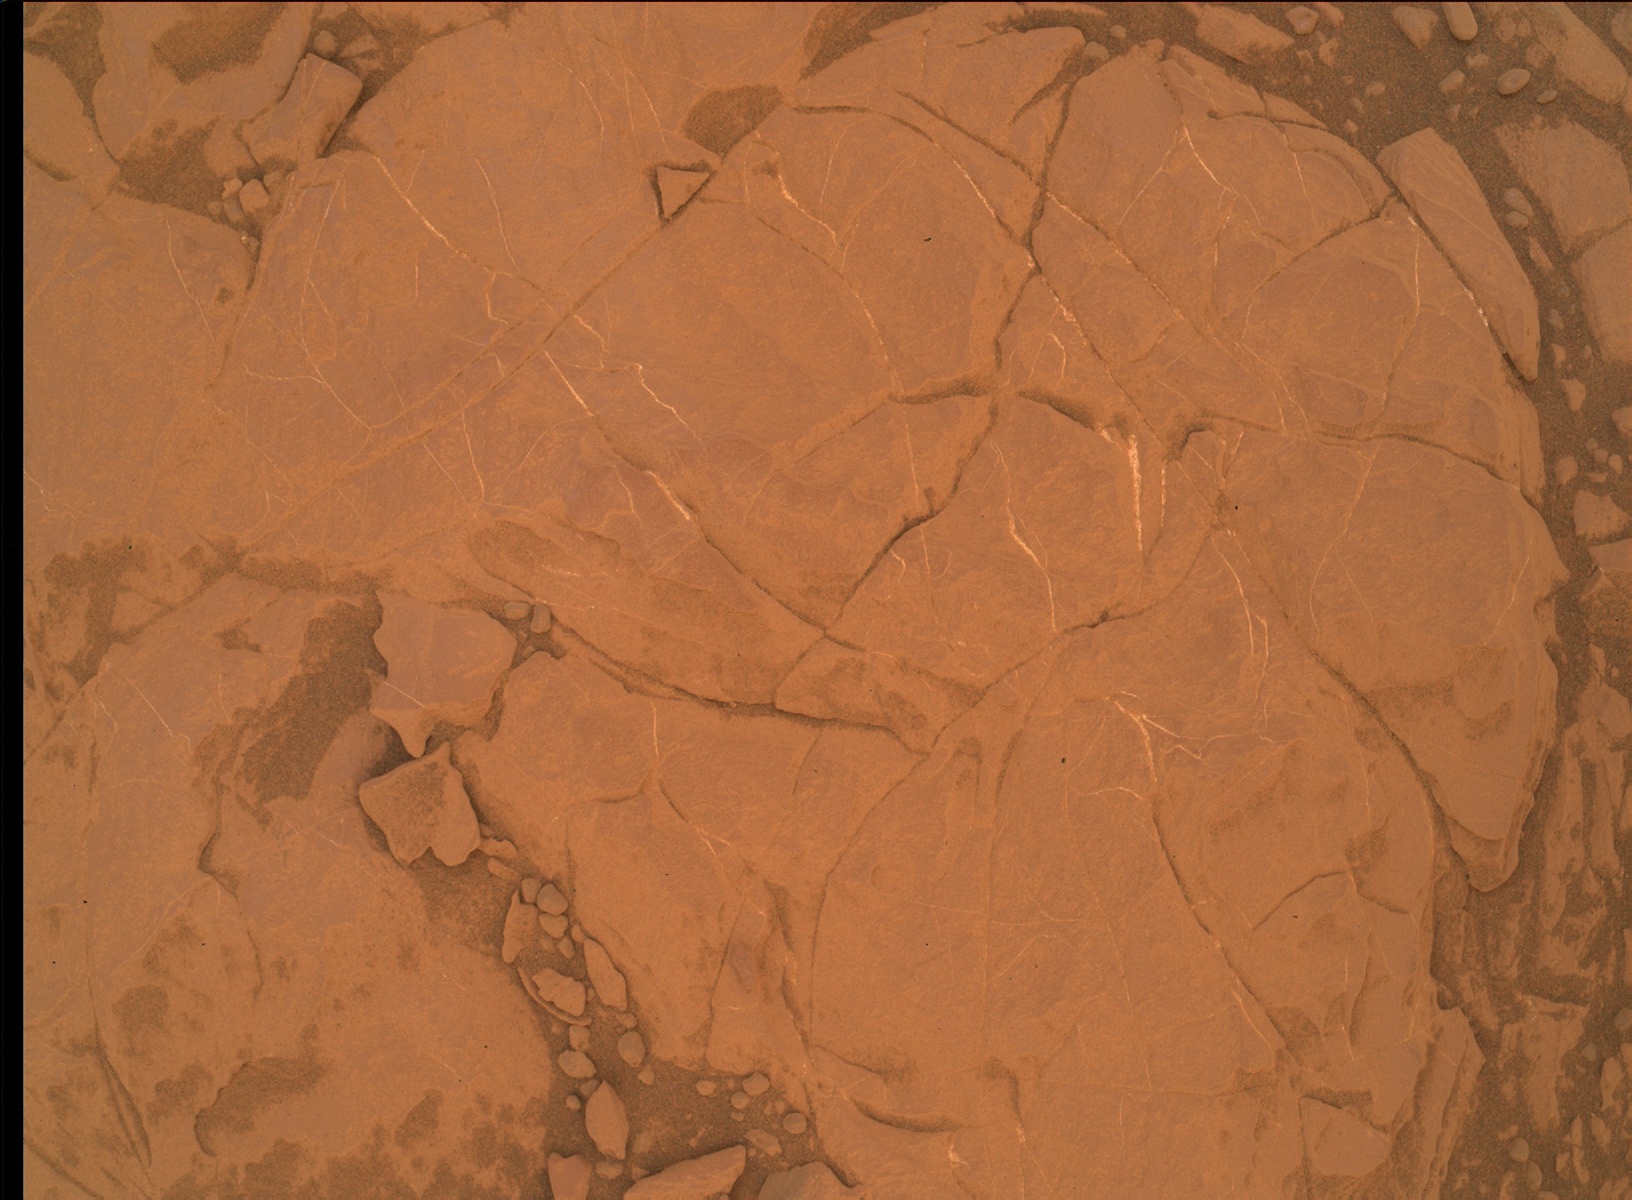 Nasa's Mars rover Curiosity acquired this image using its Mars Hand Lens Imager (MAHLI) on Sol 2111